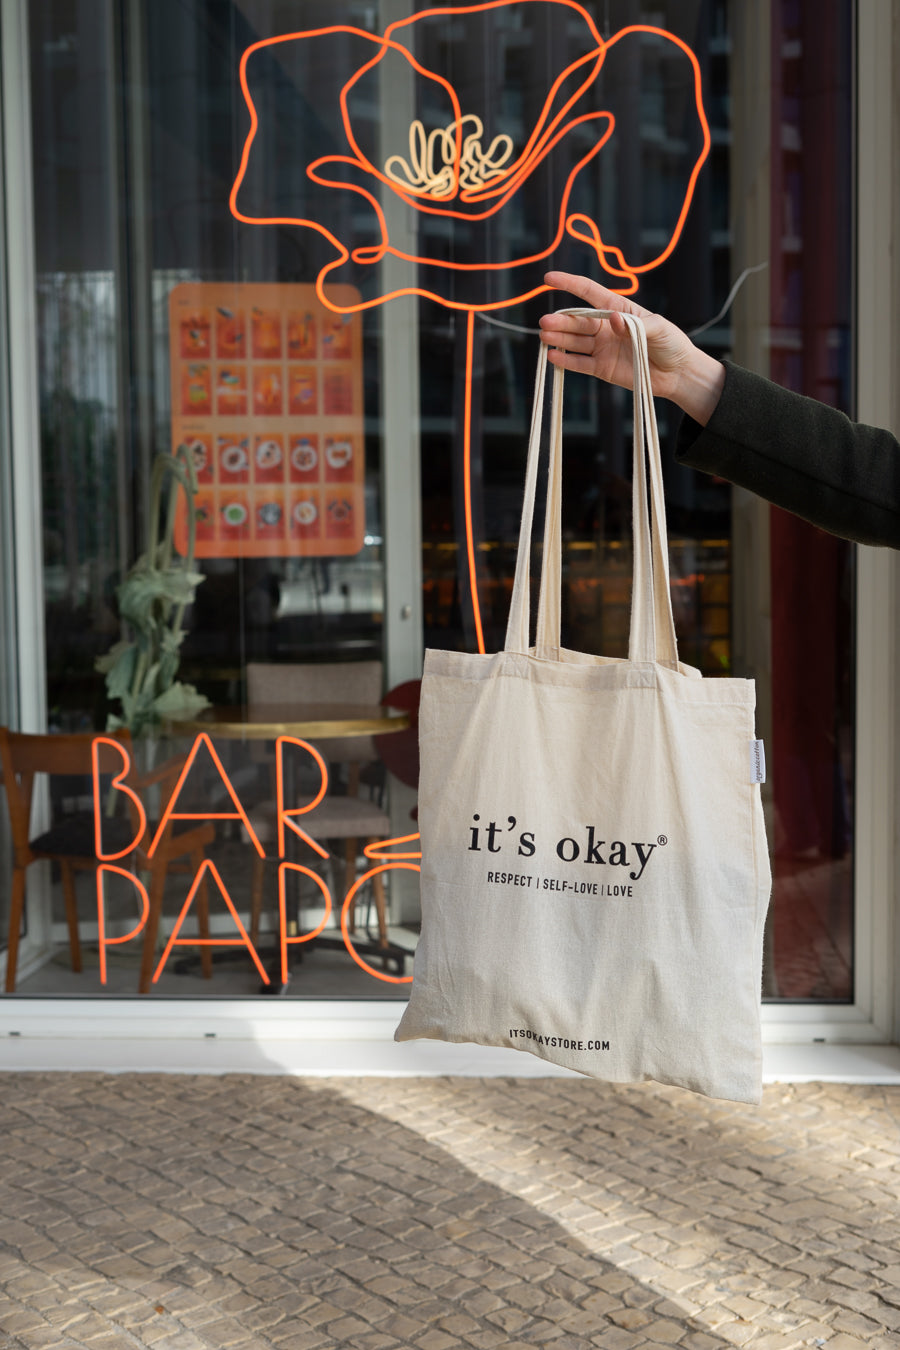 it's okay tote bag: organic cotton, black ink, serigraphy. based on respect, self-love and love. 